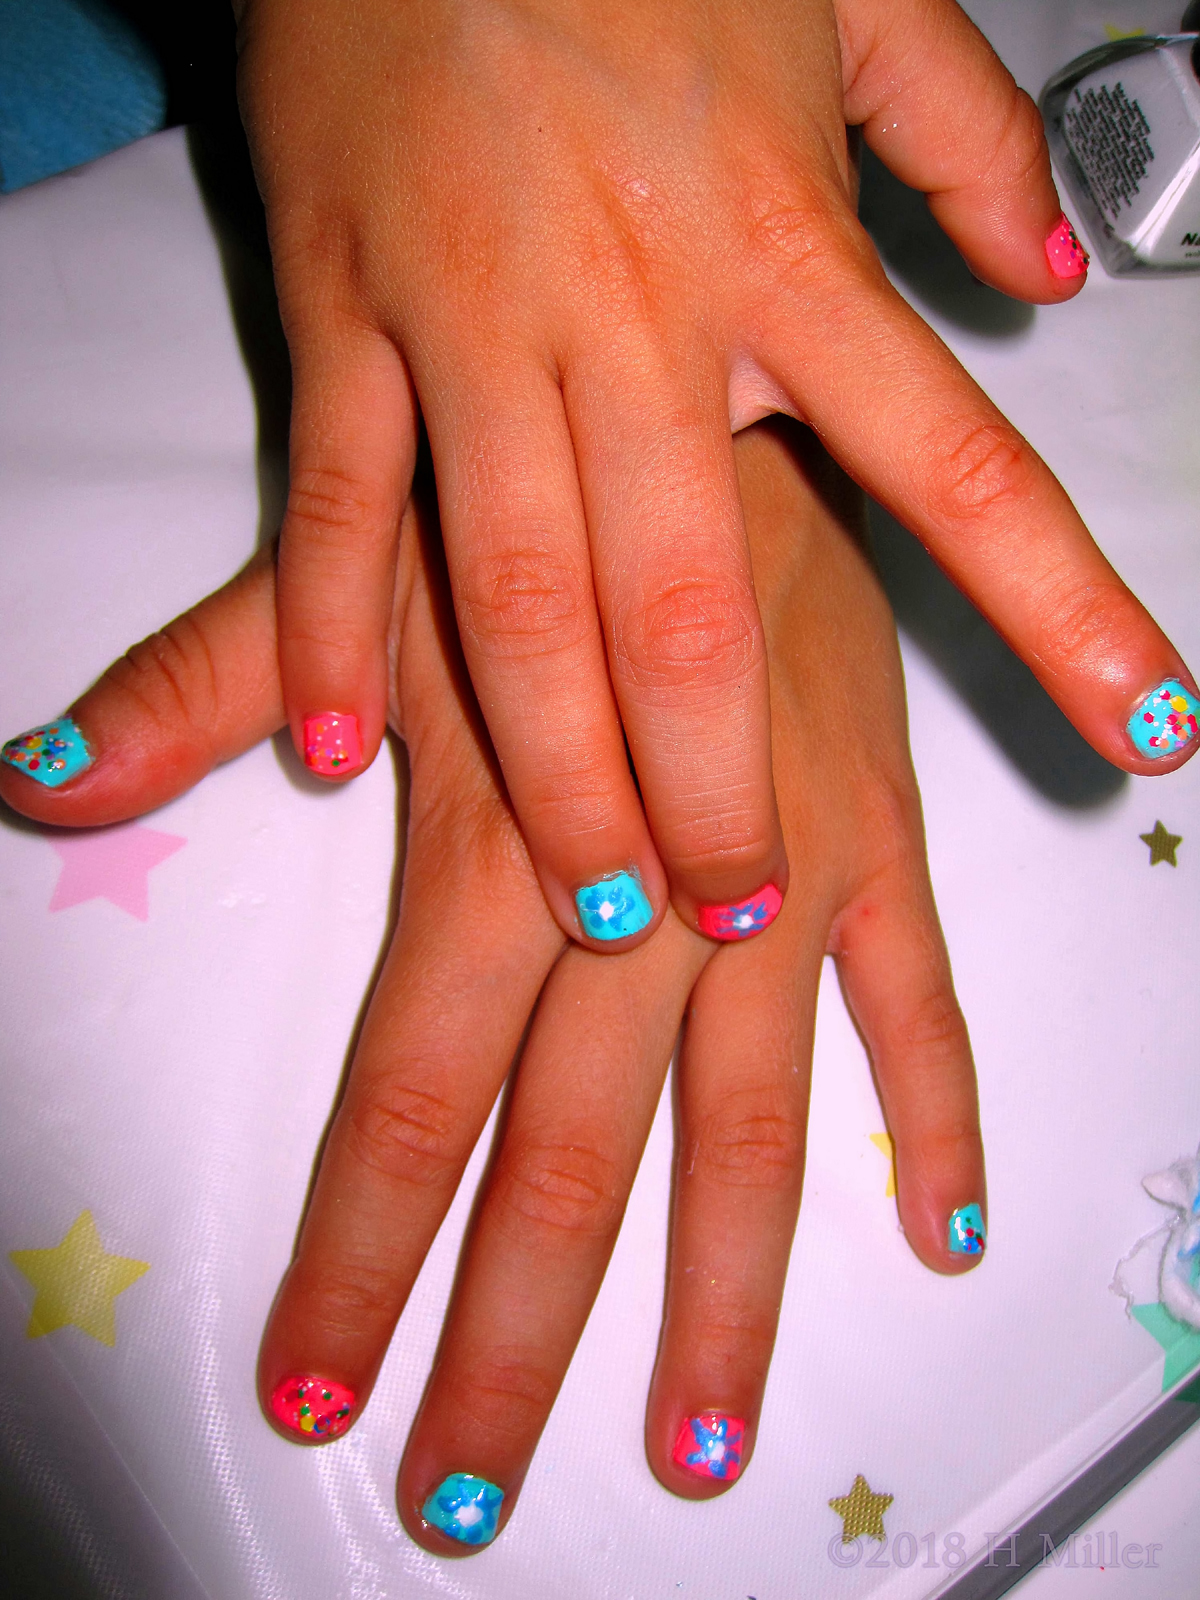 Colorful Cute Nail Art With Flower Design! 